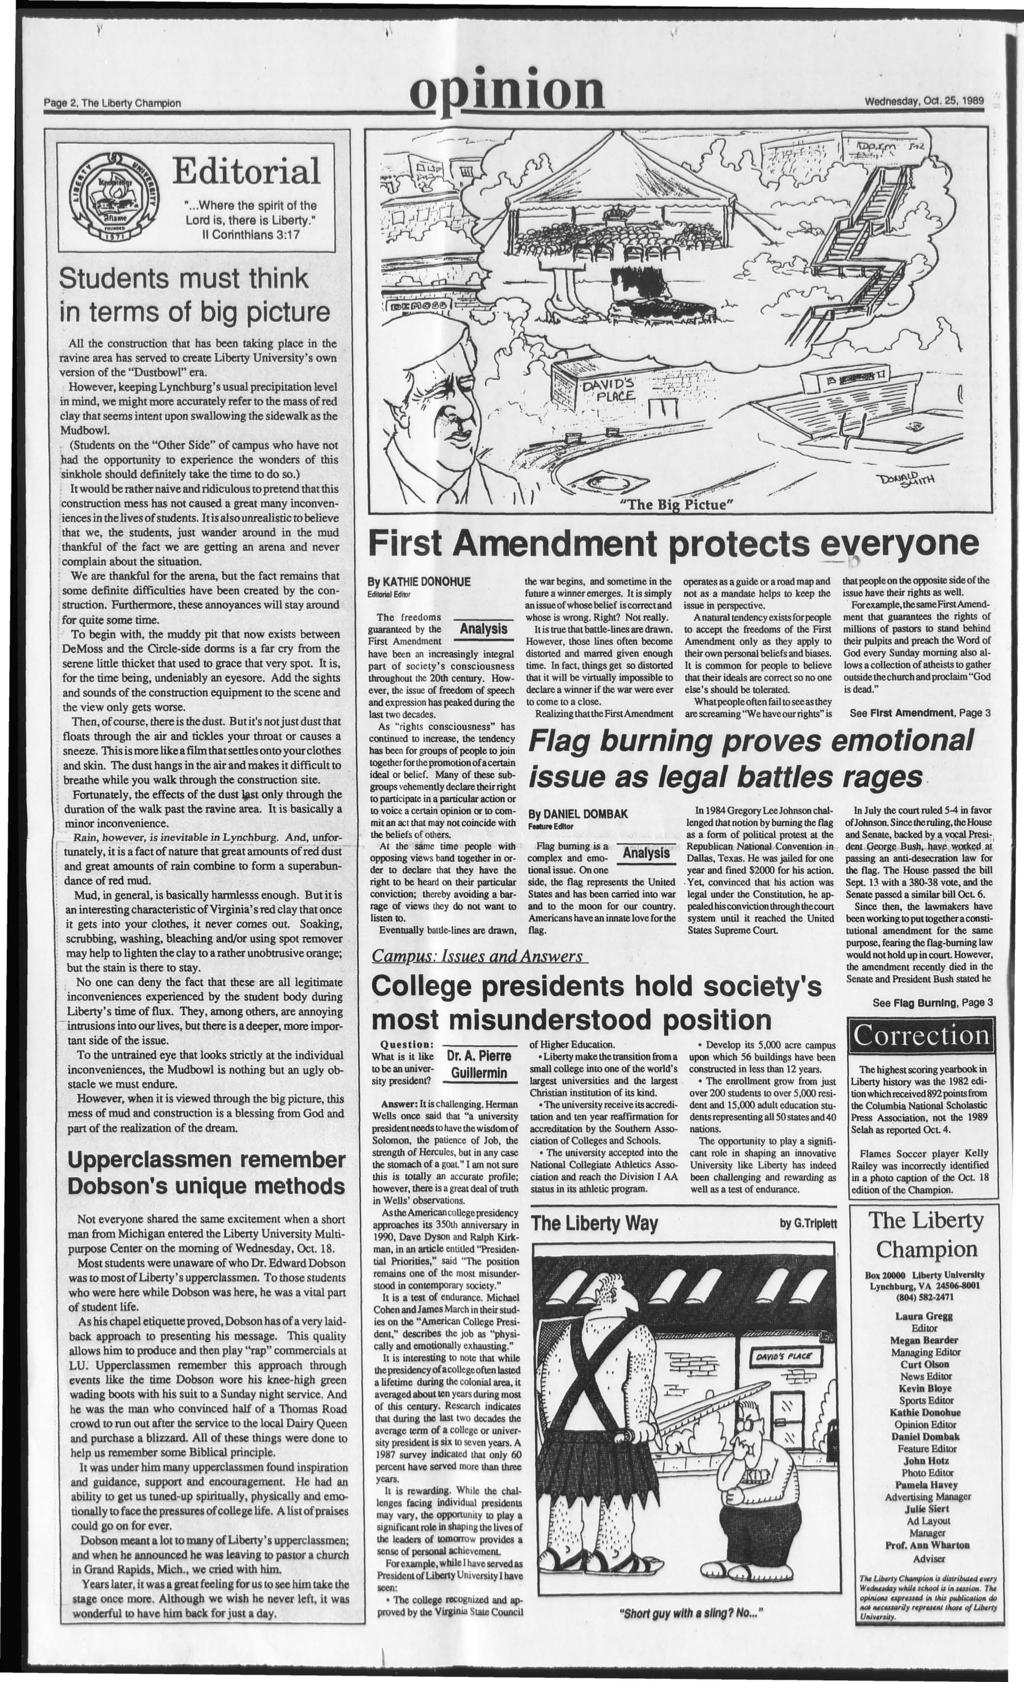 Page 2, The Lberty Champon opnon Wednesday, Oct. 25,1989 Edtoral "...Where the sprt of the Lord s, there s Lberty.